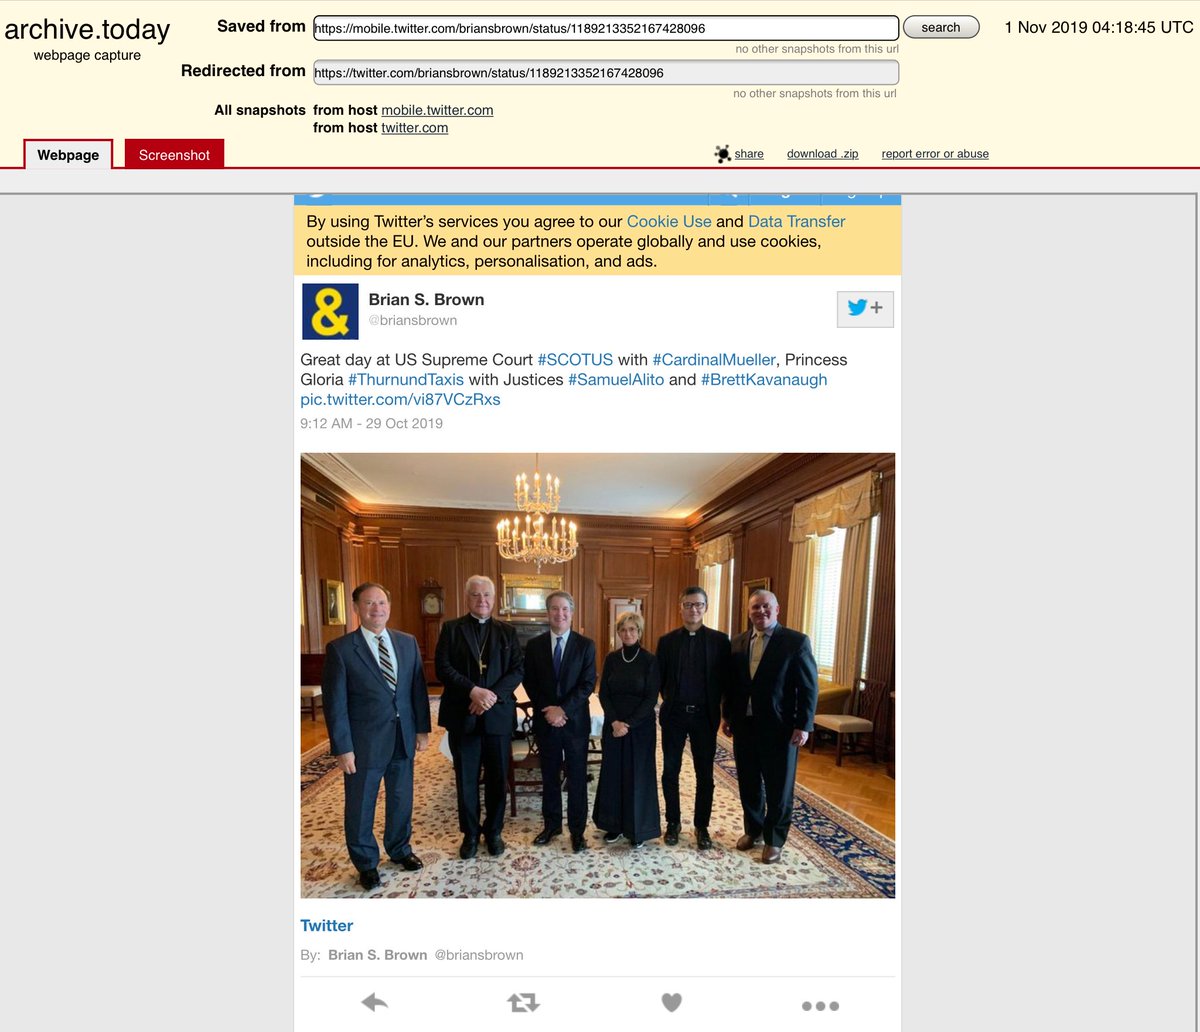 Justice Alito and Justice Kavanaugh SHOULD RECUSE THEMSELVES FORTHWITHFFS they posed for a “selfie” AFTER they had (likely an Ex Parte Meeting) with NOM’s President who then tweeted out the selfie.Archived in case that Jackhole deletes his tweet http://archive.is/zS1UC 